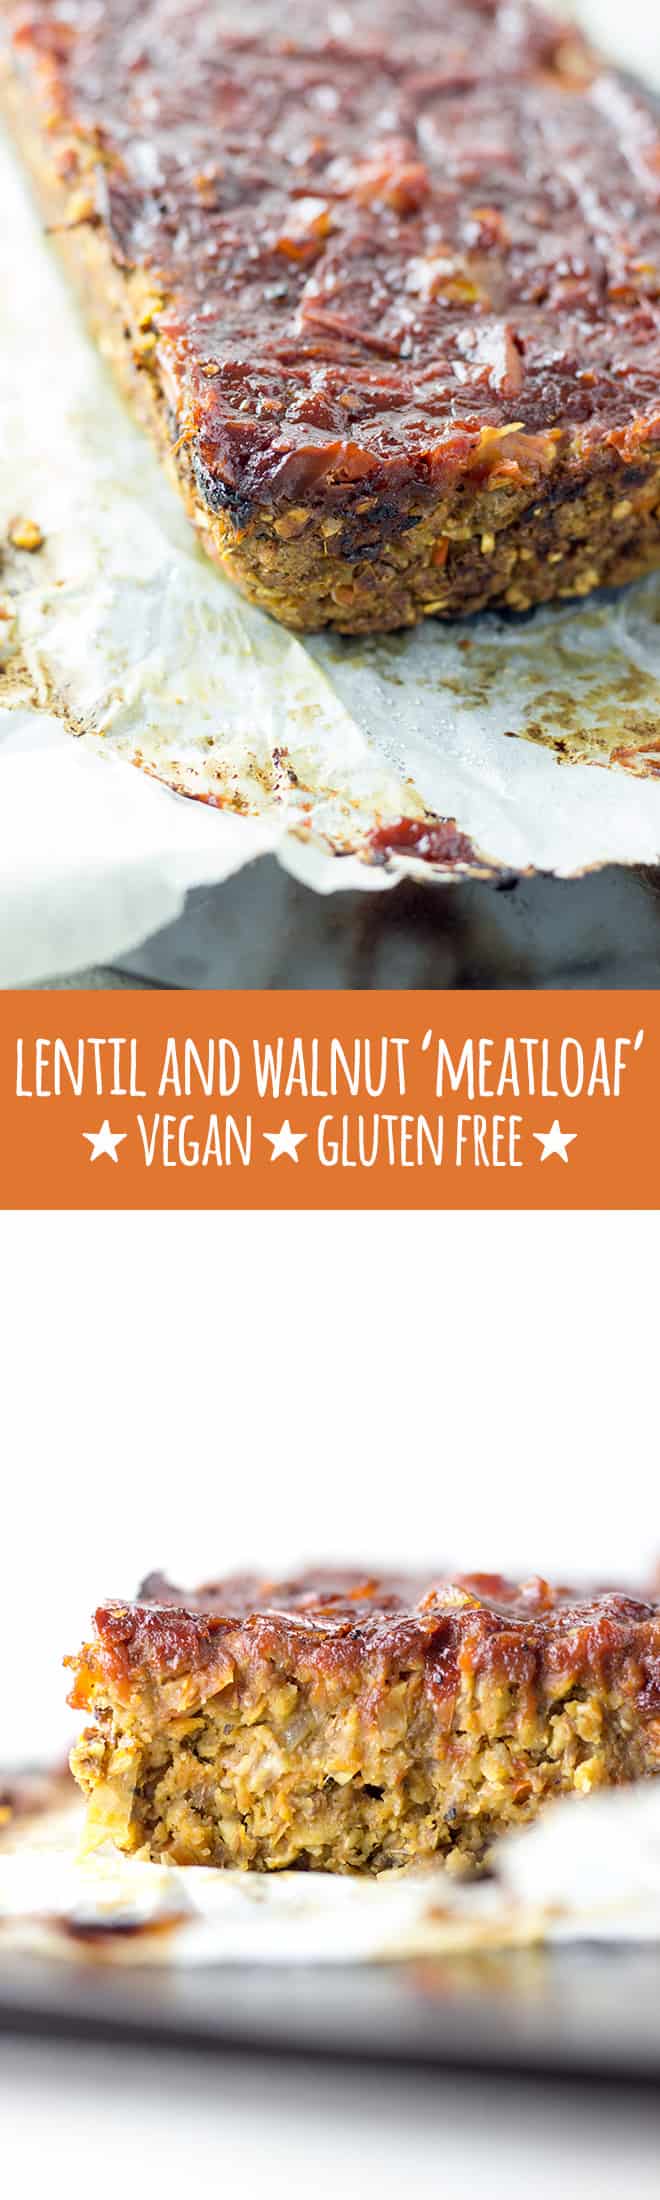 This glazed vegan loaf is made with lentils, walnuts, vegetables, oats, polenta and chia seeds, which altogether combine to create a savoury and flavourful loaf for those times when you just need some good old-fashioned comfort food. 